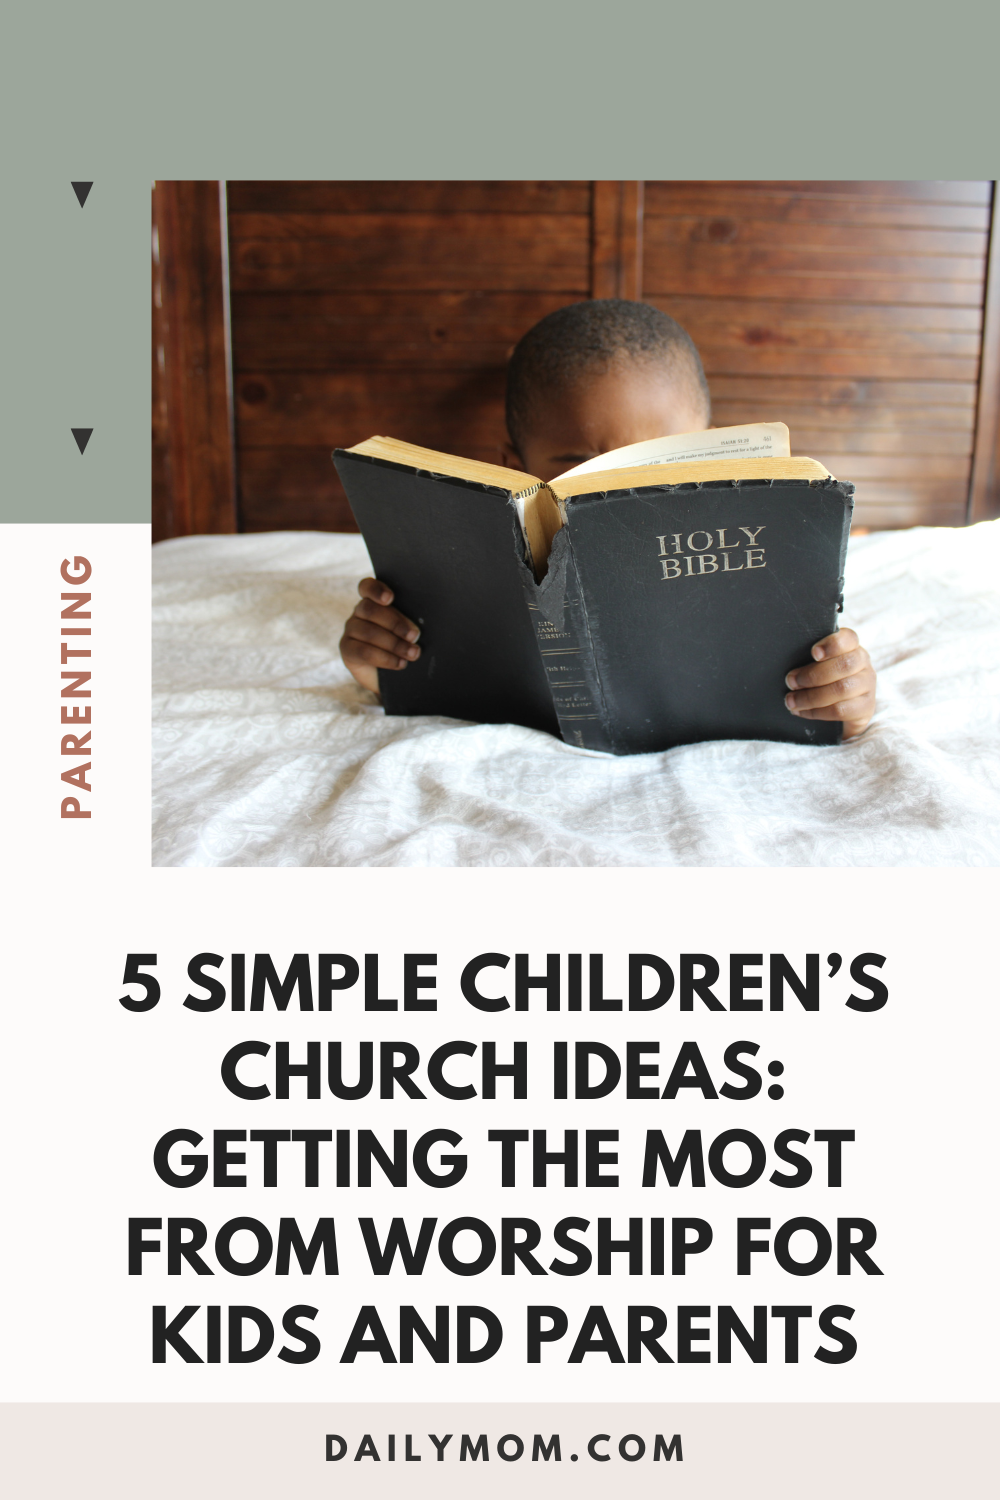 5 Simple Children’s Church Ideas: Getting The Most From Worship For Kids And Parents